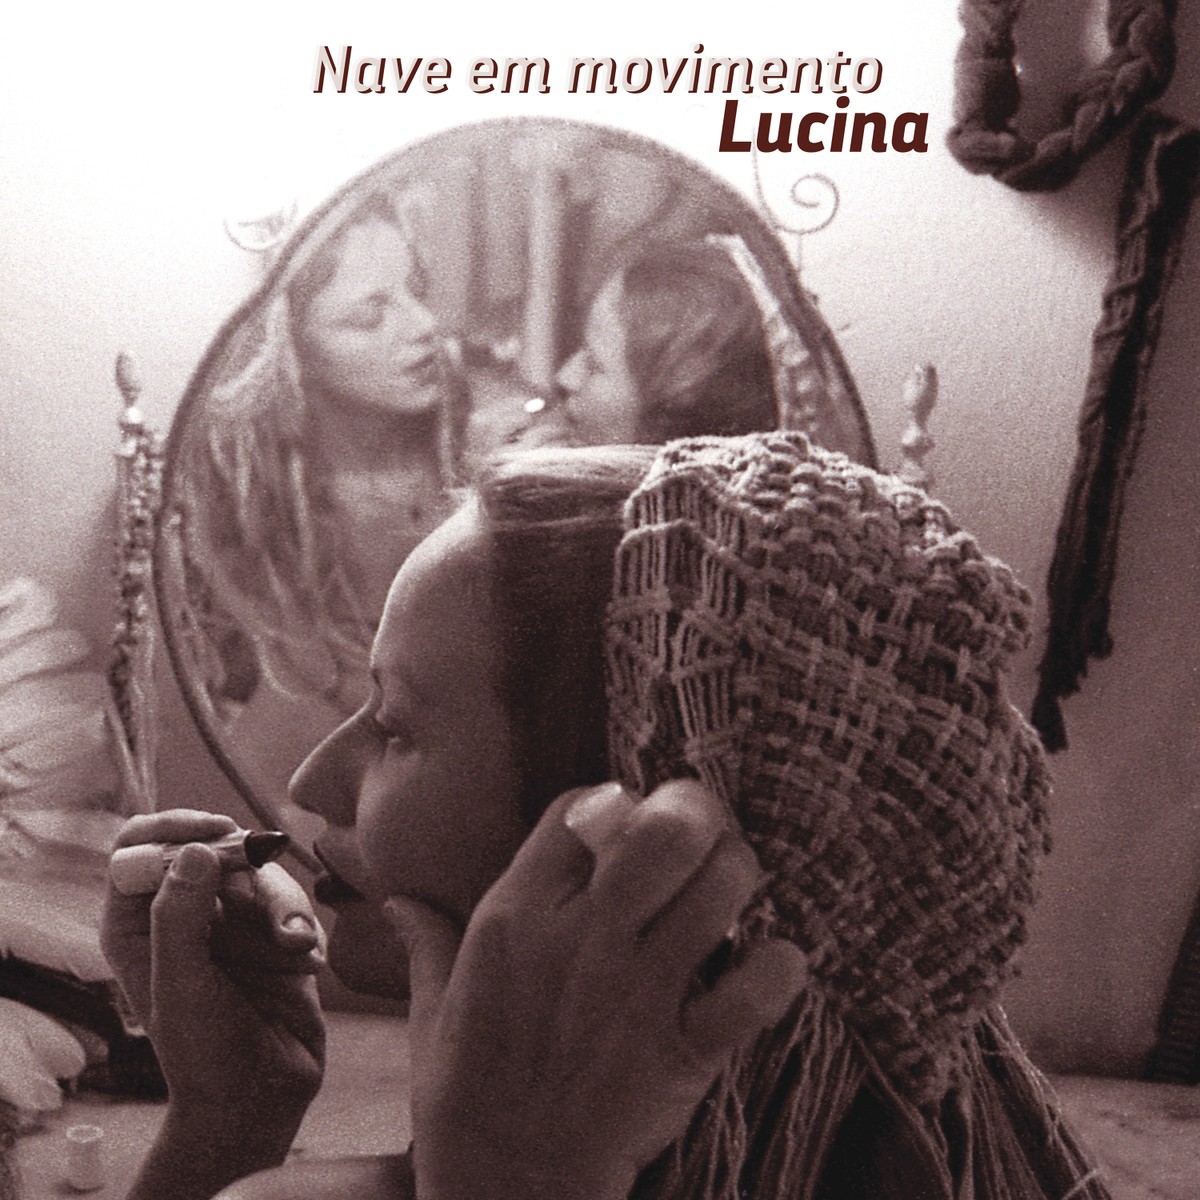 Luhli’s organic work with Lucina springs with vigor in the unpublished vintage of the album ‘Nave em Movimento’